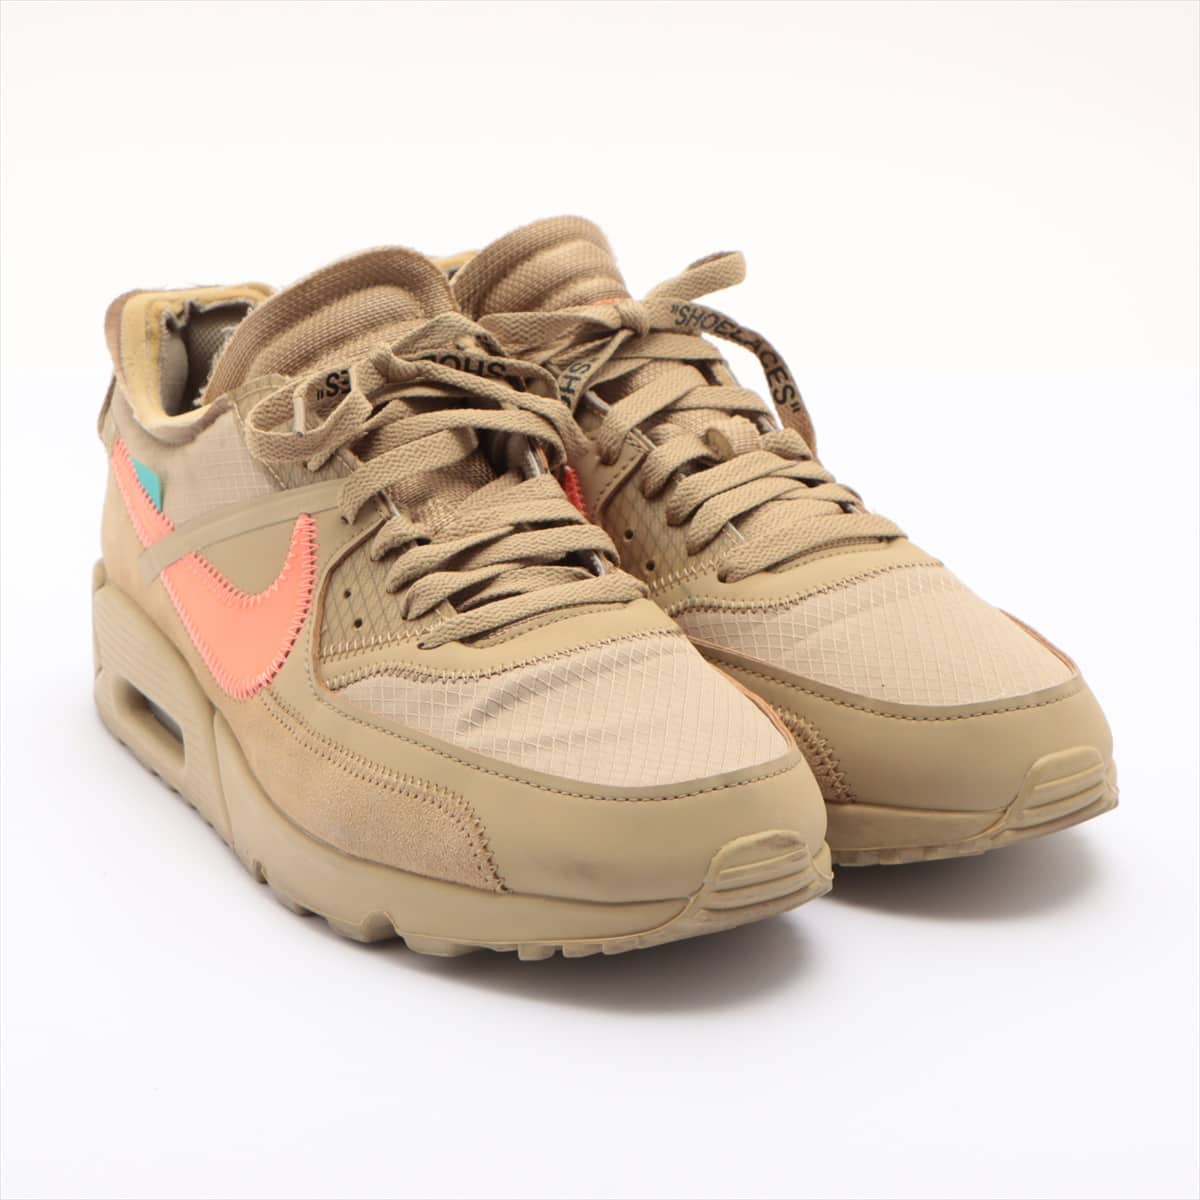 NIKE × OFF-WHITE Leather x fabric Sneakers 28.5cm Men's Beige THE 10:NIKE AIR MAX 90 AA7293-200